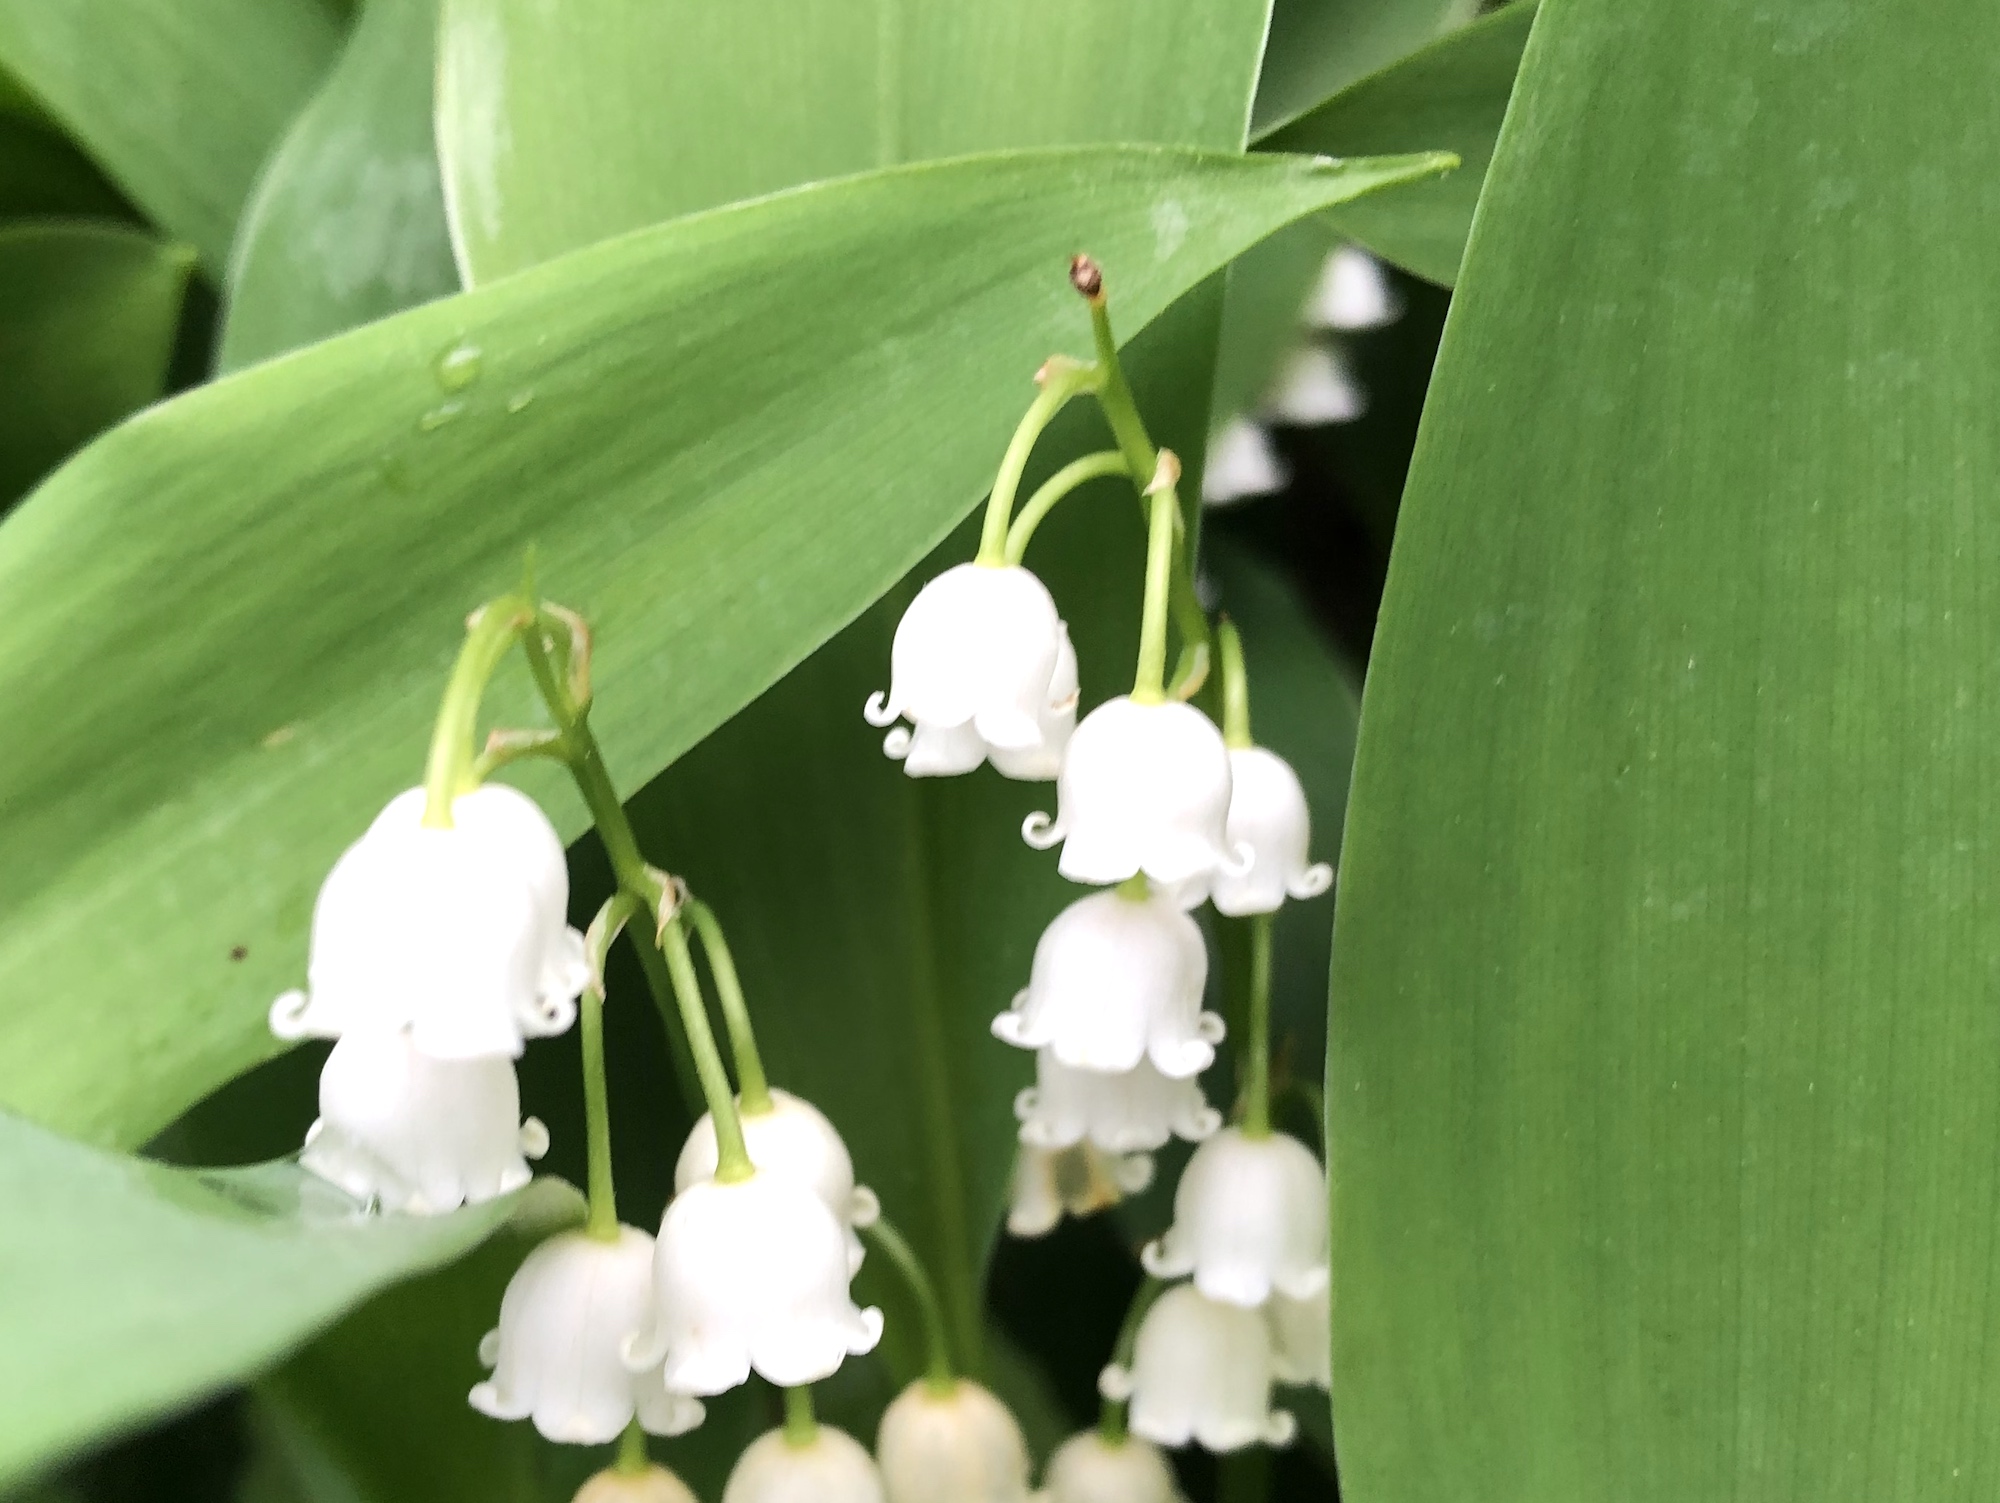 Lily of the Valley on May 30, 2019.